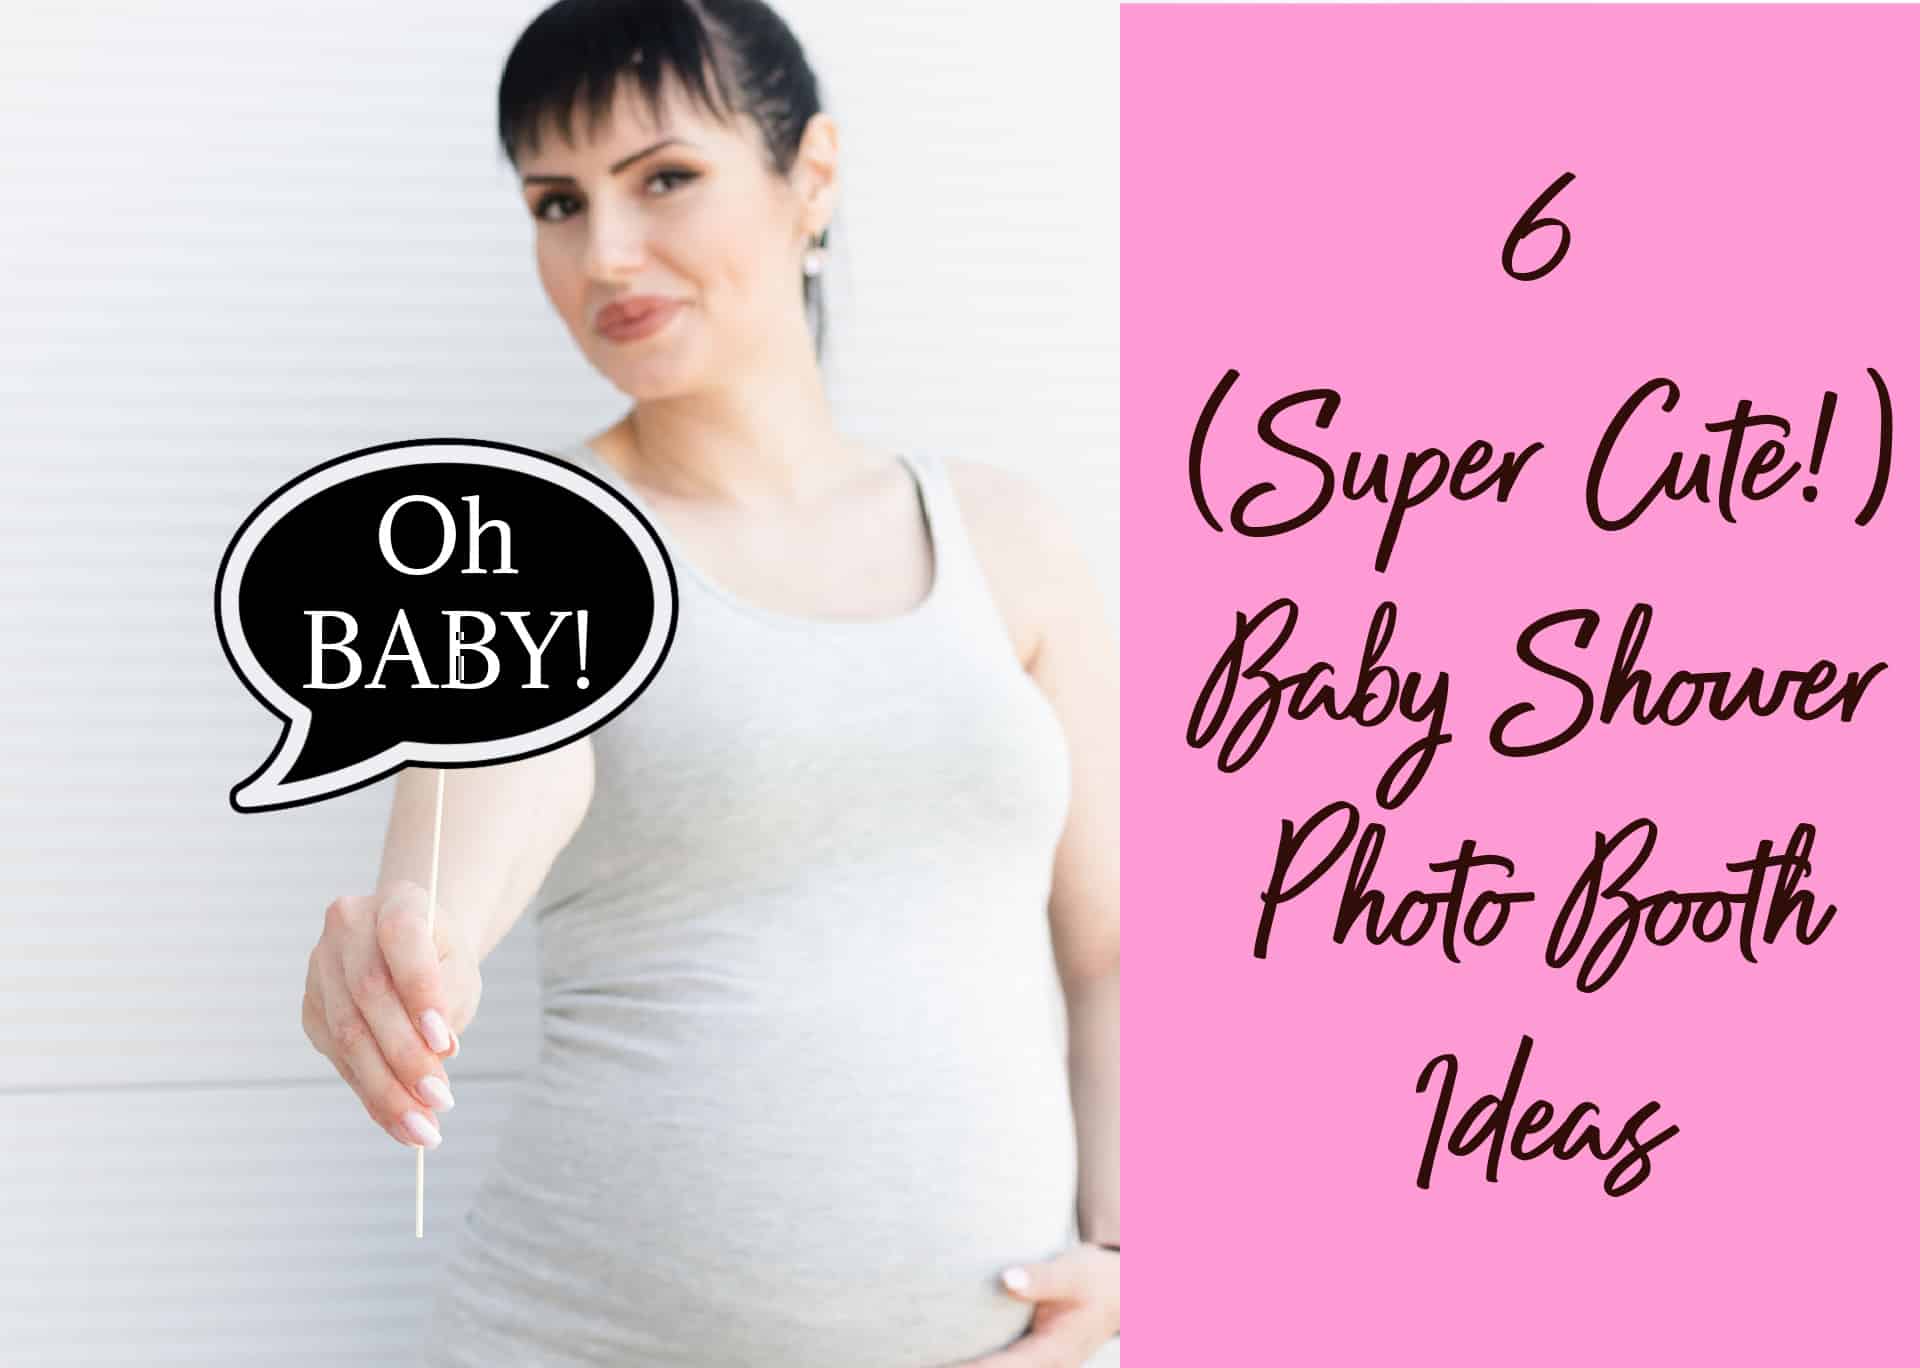 6 Super Cute Baby Shower Photo Booth Ideas